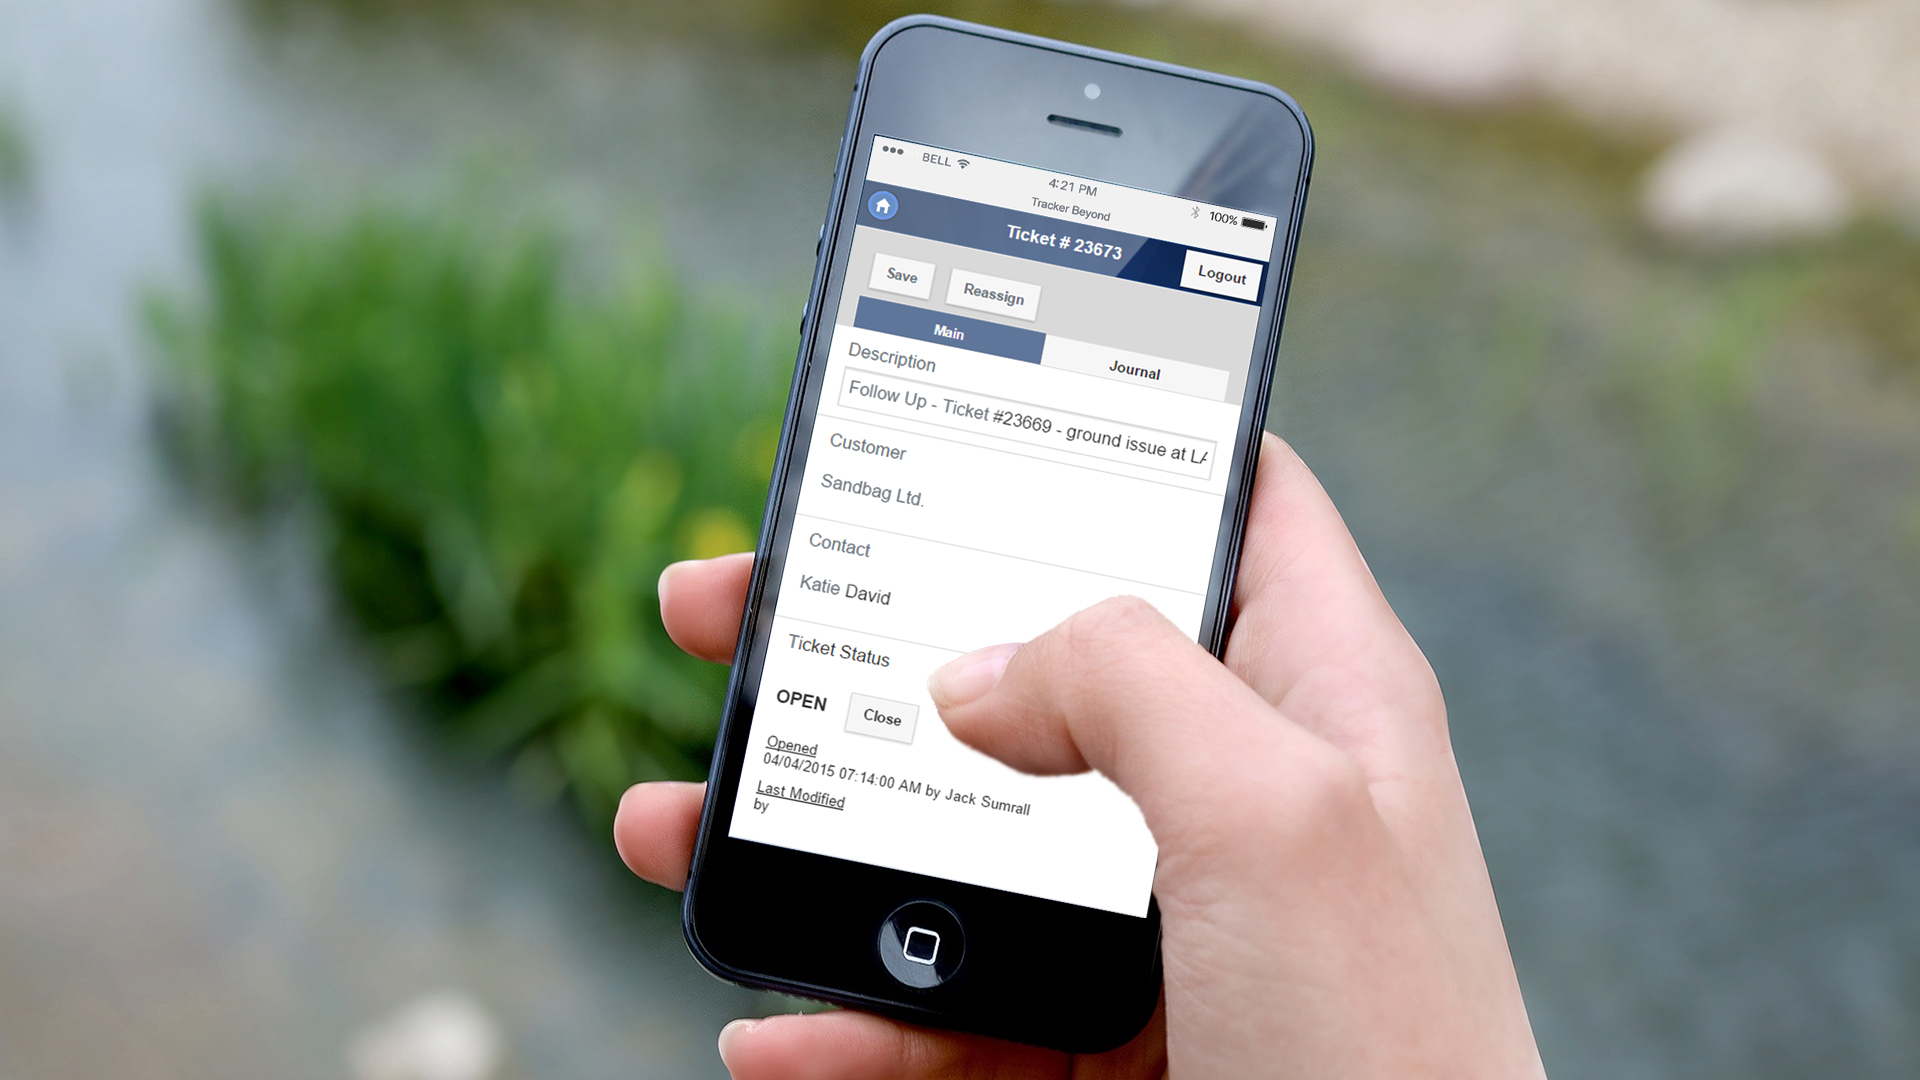 Tracker Software - Take the power of Tracker on the go with Tracker Mobile. Shown here working on an iPhone. Tracker Mobile is a powerful web app that you can access from anywhere. Enjoy the features of Tracker in the palm of your hand.